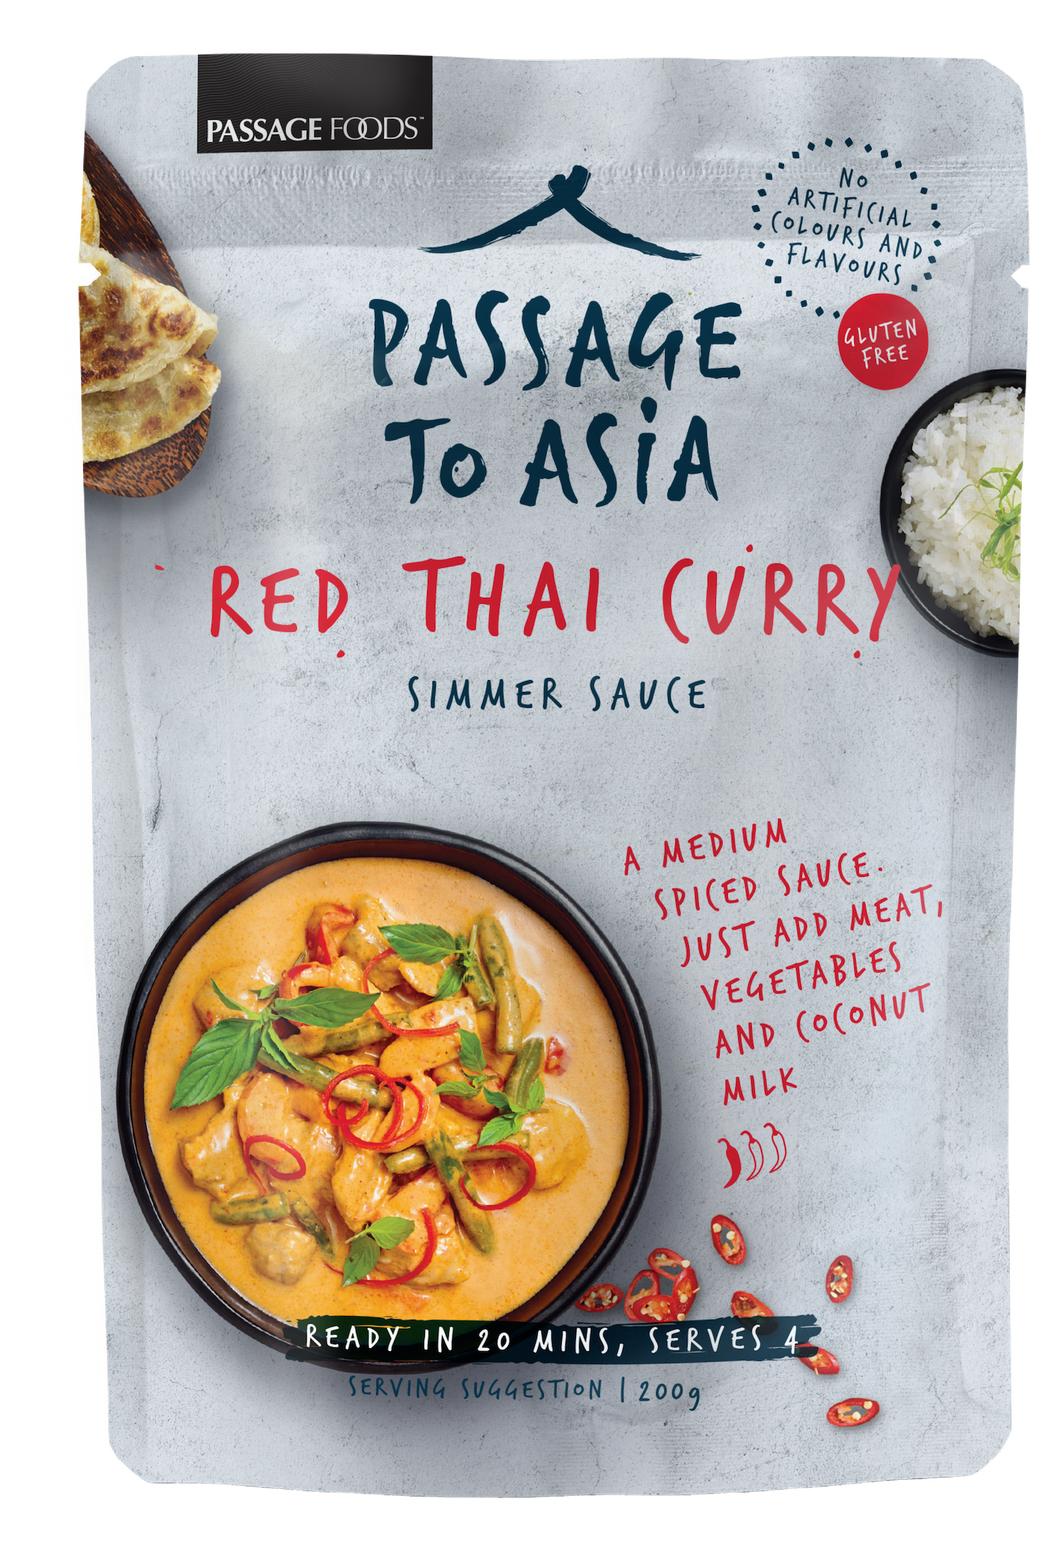 Passage to Asia - Red Thai Curry Simmer Sauce